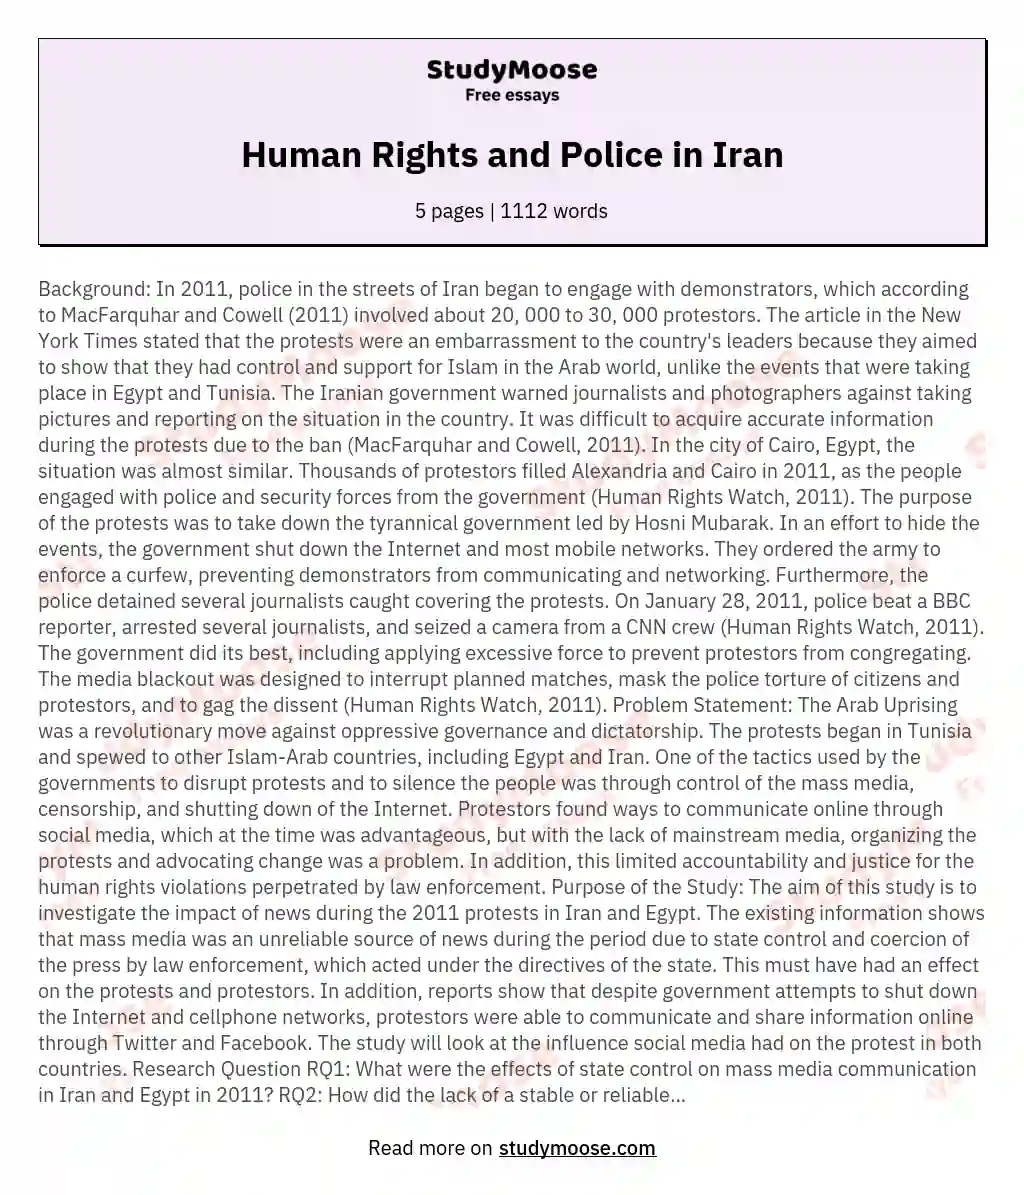 Human Rights and Police in Iran